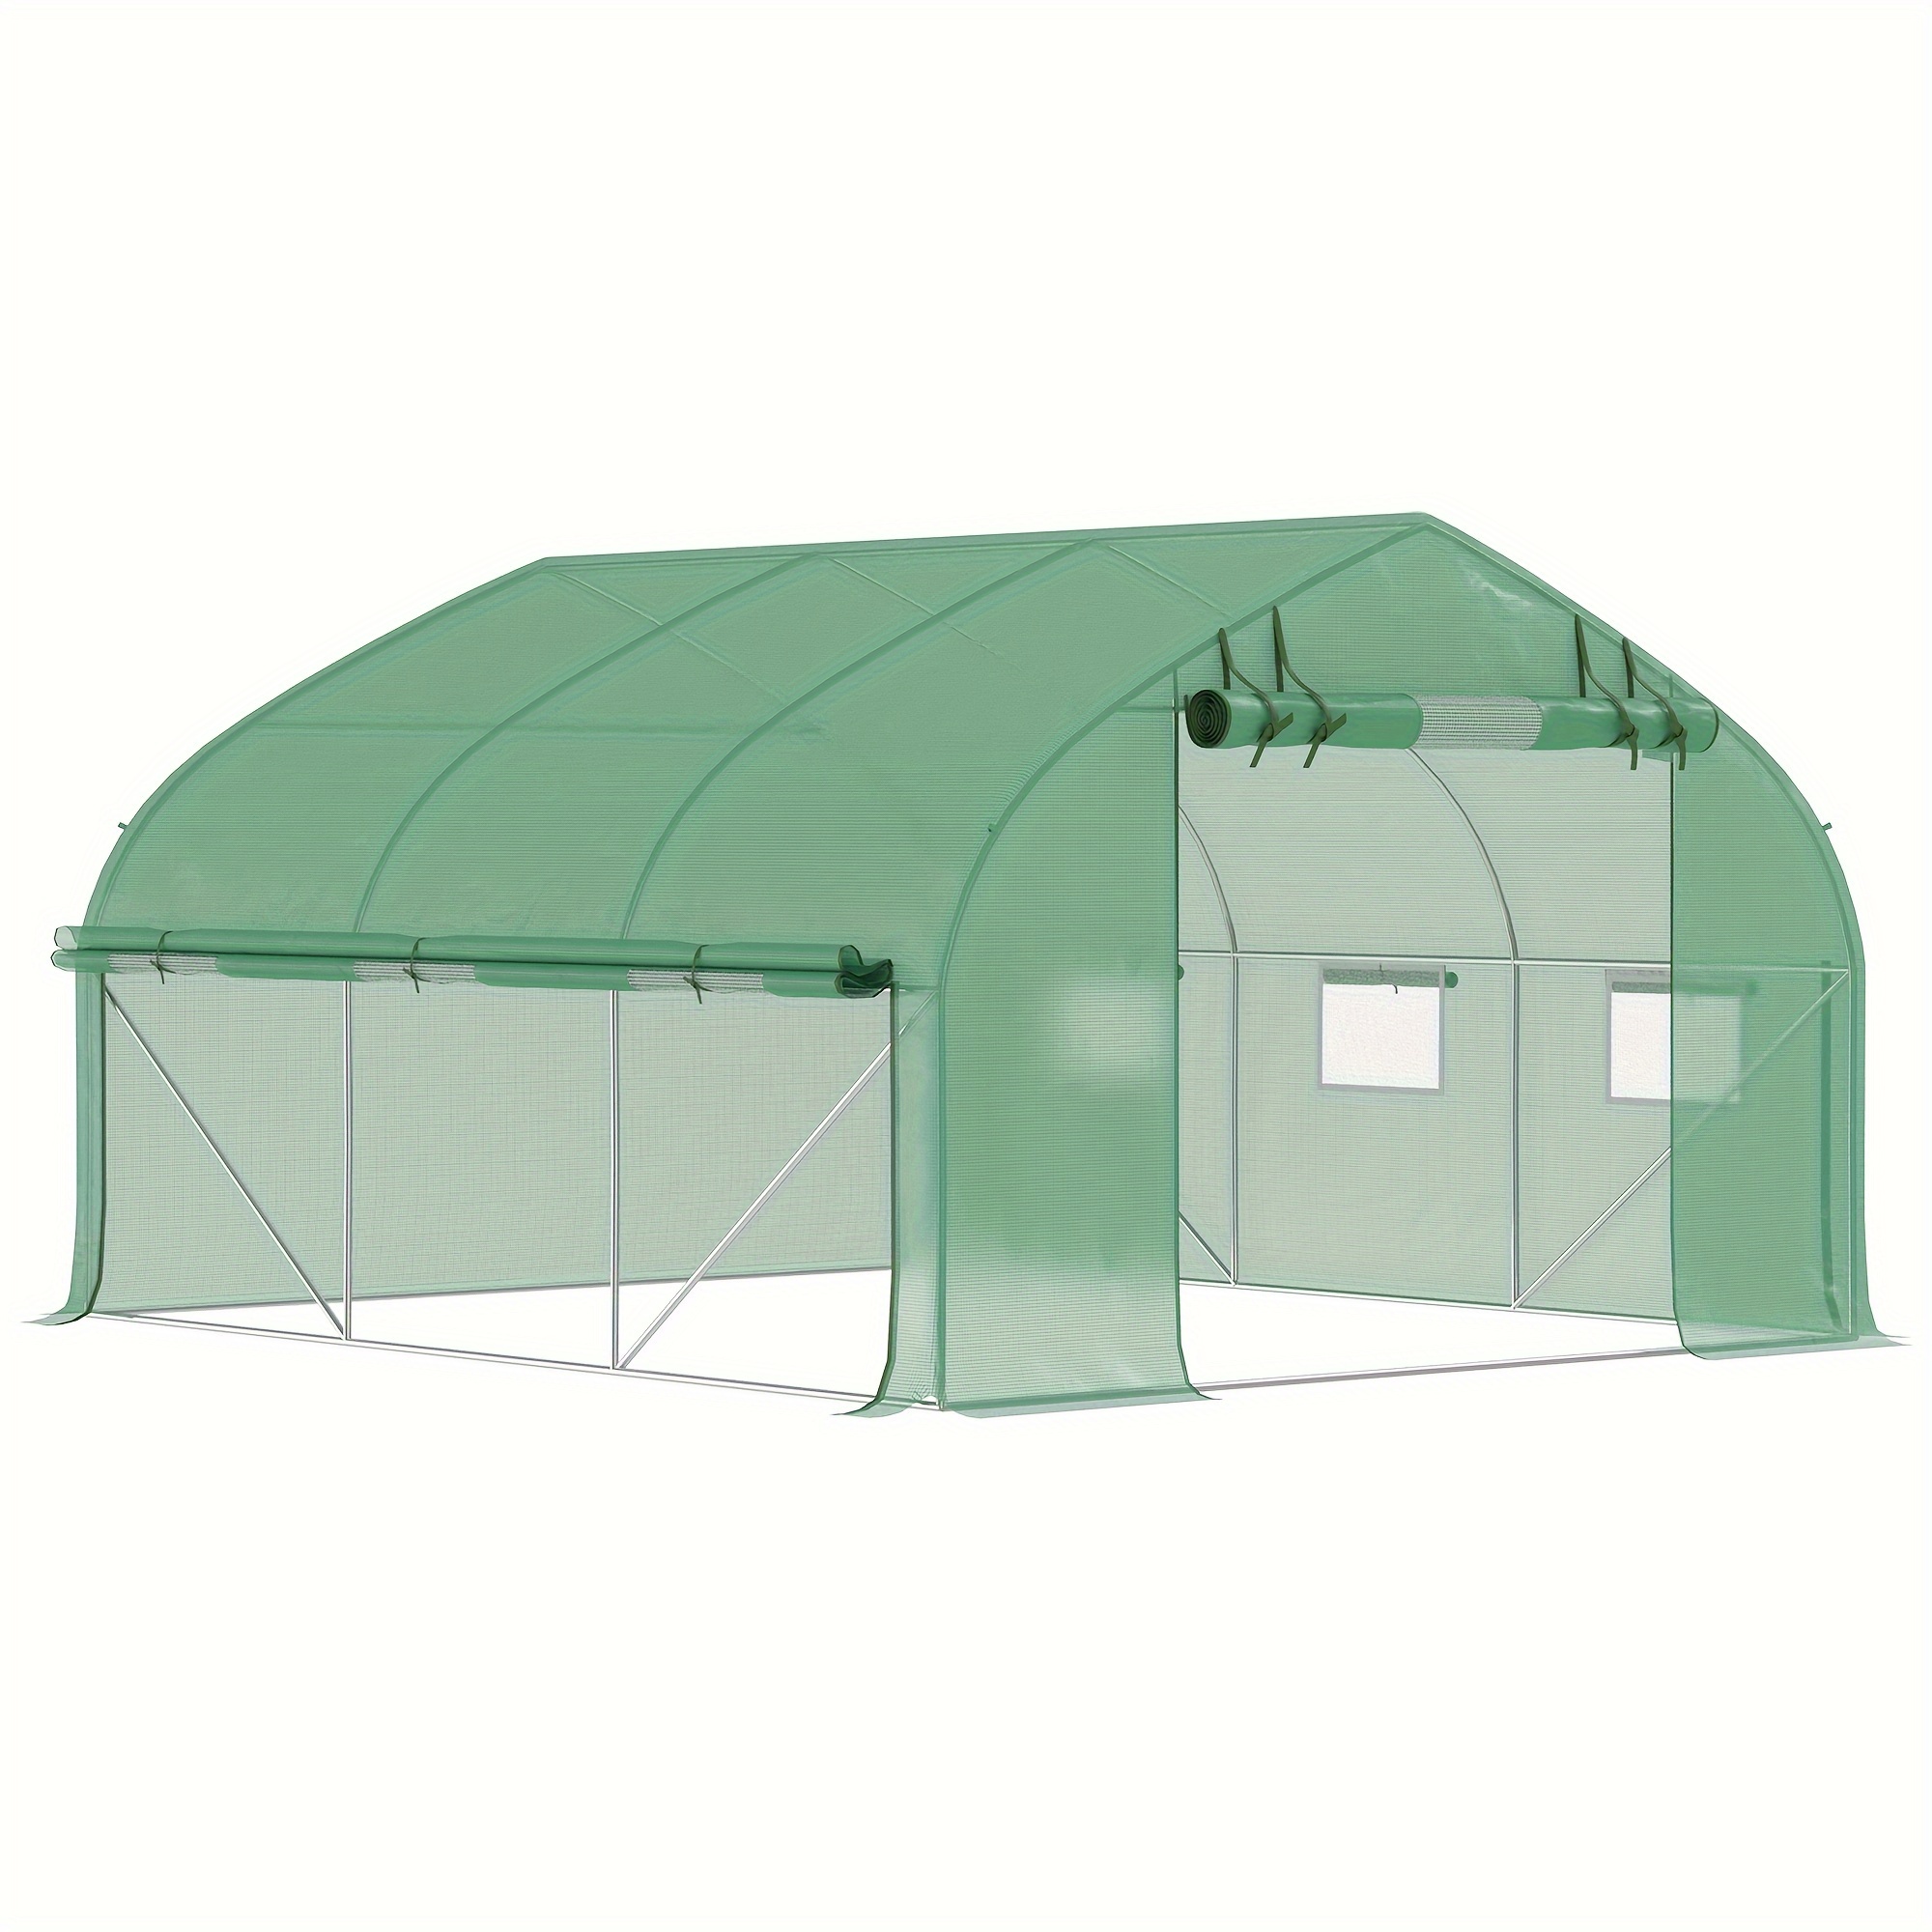 

Outsunny 11.5' X 10' X 6.5' Walk-in Tunnel Greenhouse With Zippered Mesh Door, 7 Mesh Windows & Roll-up Sidewalls, Upgraded Gardening Plant Hot House With Galvanized Steel Hoops